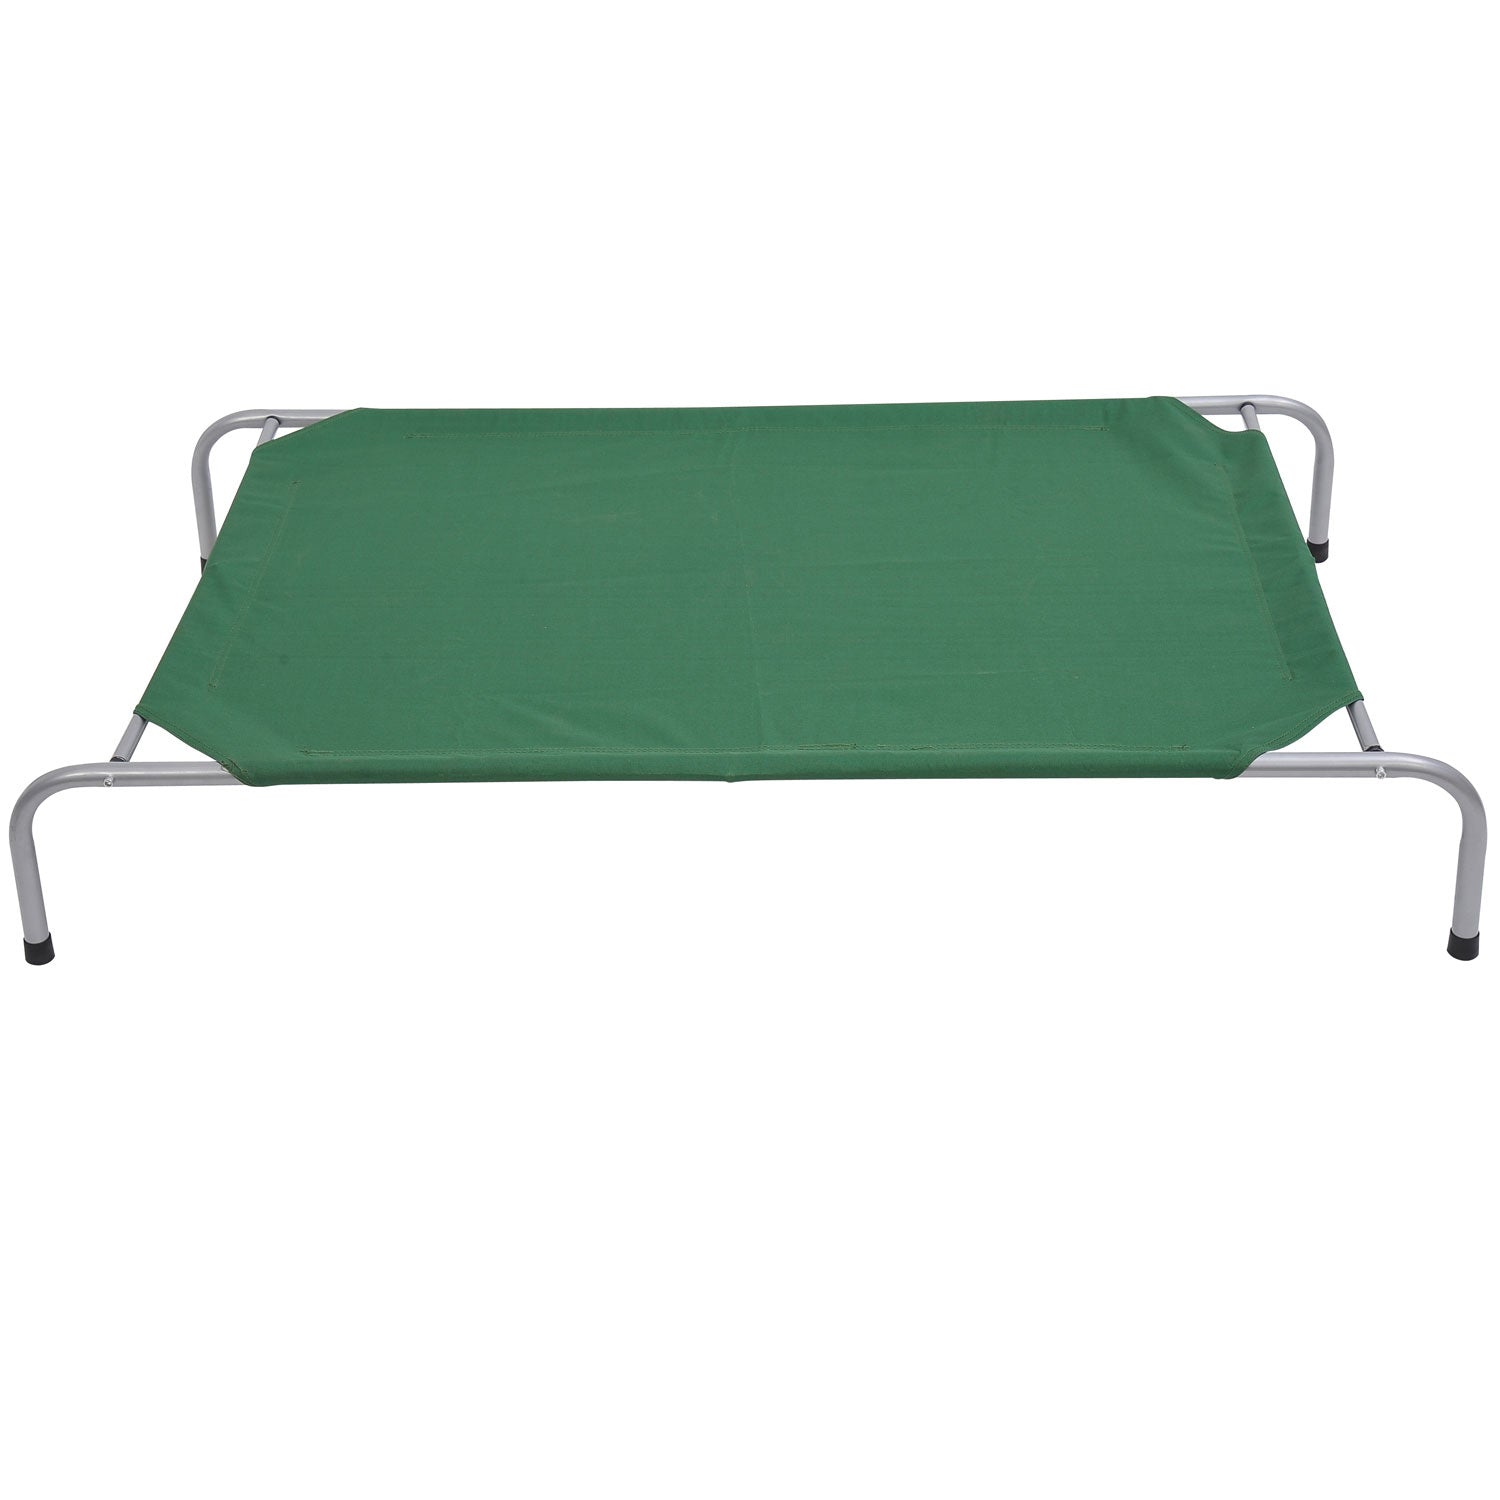 Portable Pets Elevated Raised Cot Bed-Green